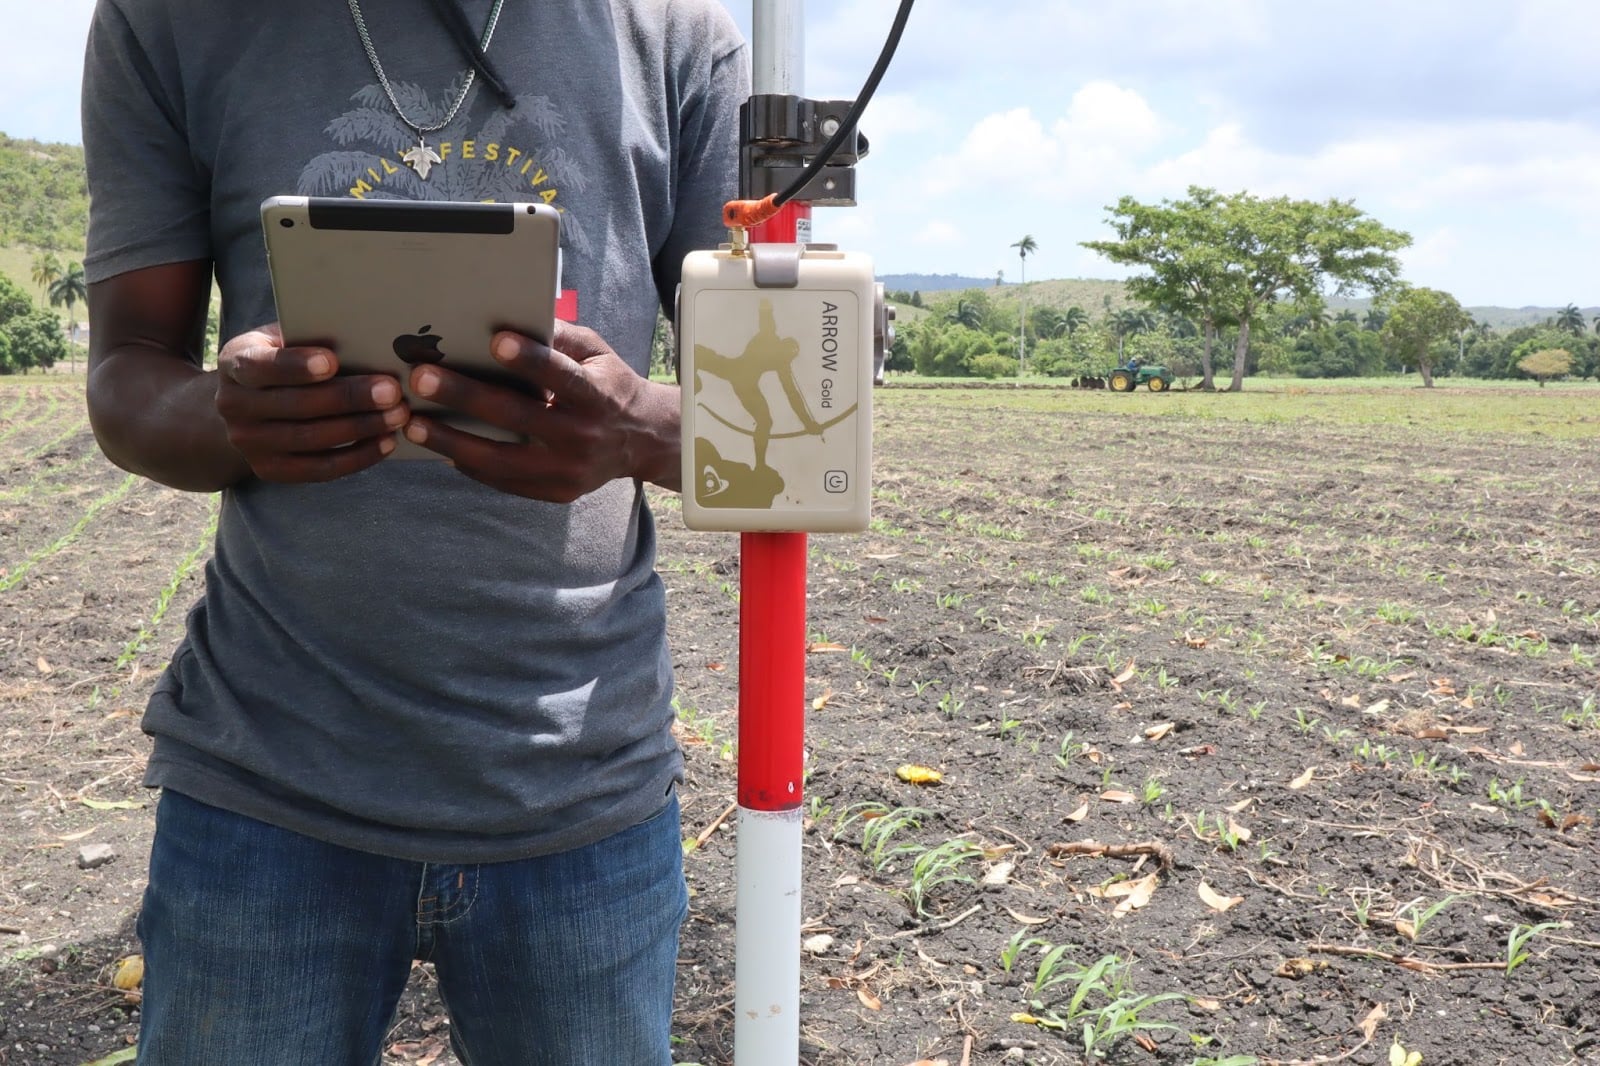 ADF Haiti Collecting Land Boundaries with Eos Arrow Gold GNSS Receiver and ArcGIS Field Maps